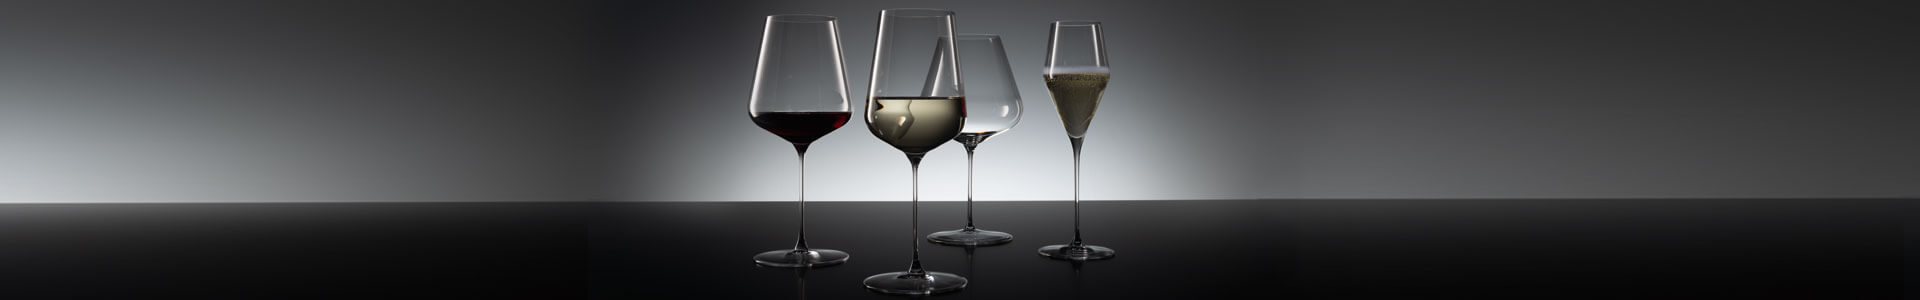 Wine glasses from Spiegelau stand on a dark surface.